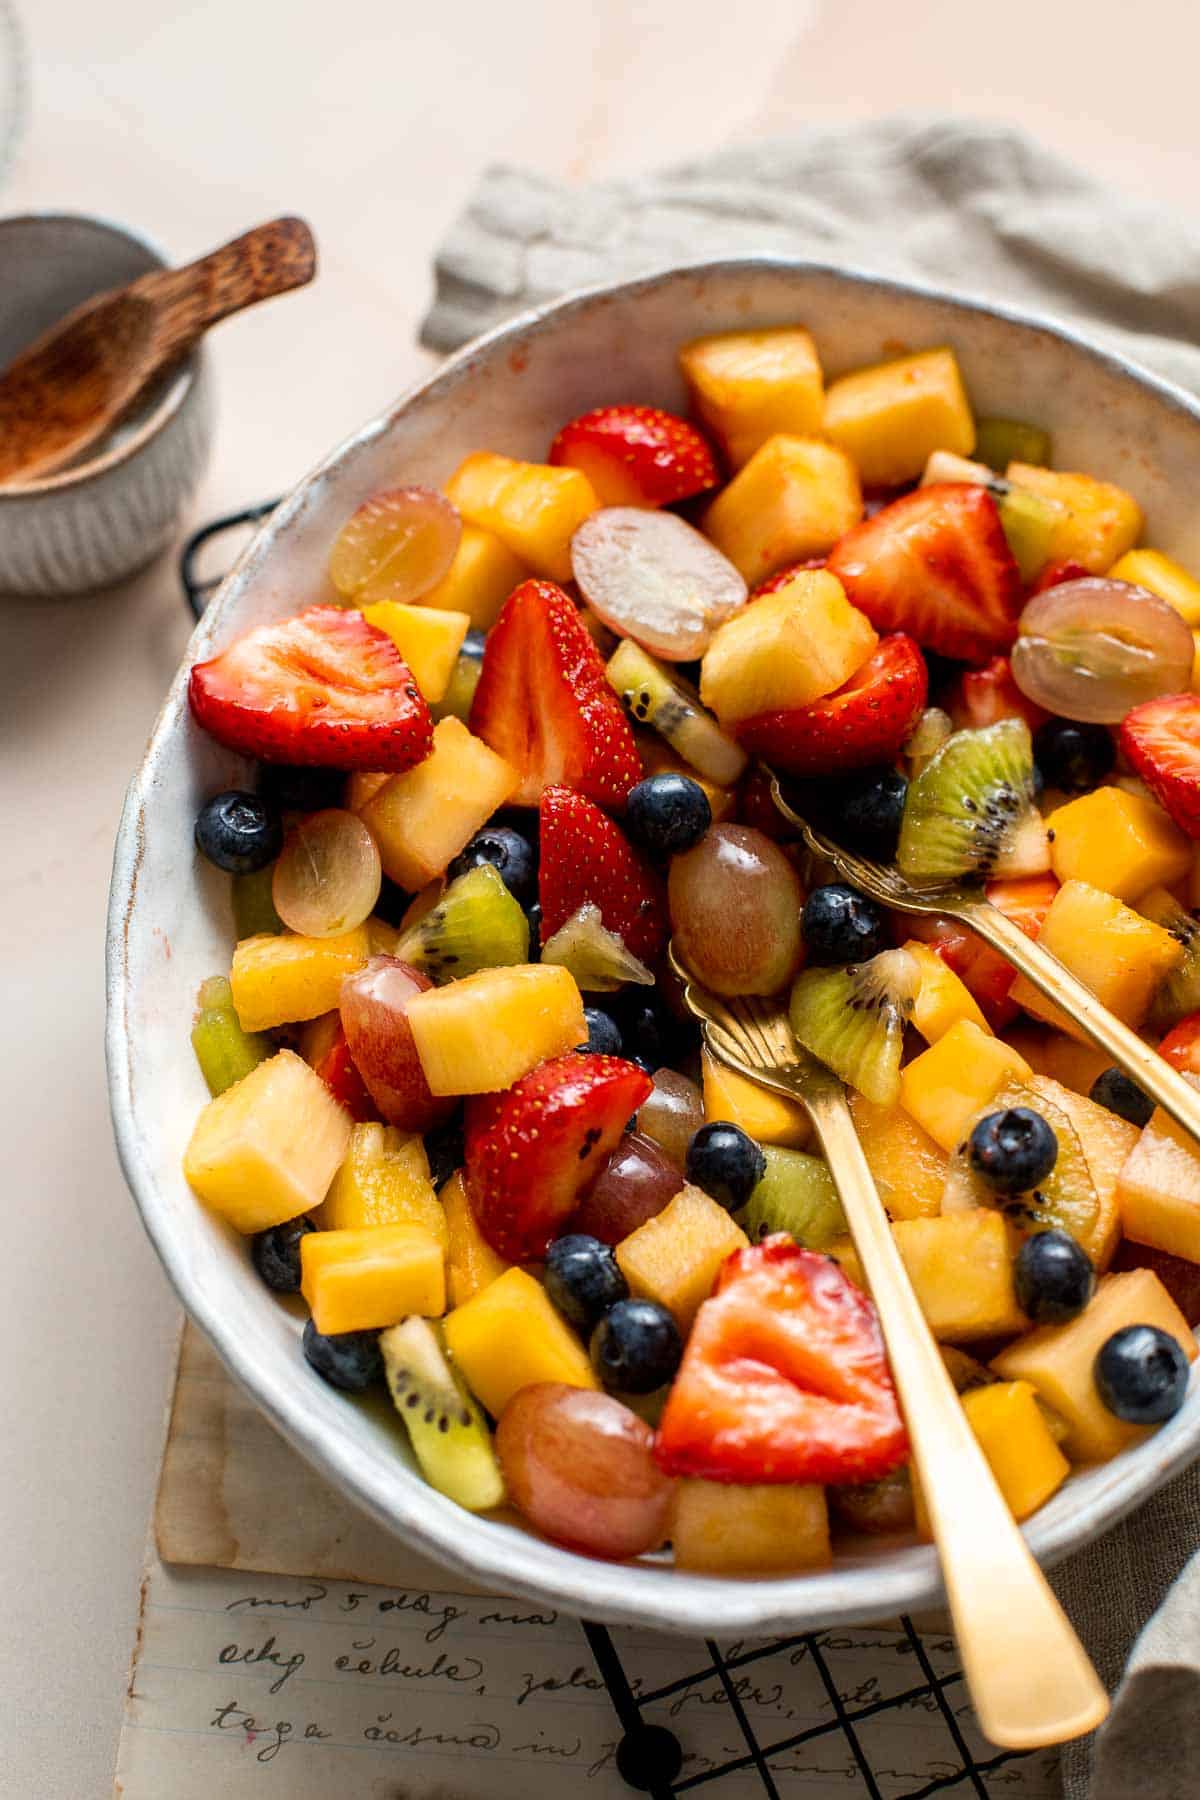 This Summer Fruit Salad is colorful, delicious, and naturally sweet (no processed sugar!). It's easy to make with fresh fruit tossed in a homemade dressing. | aheadofthyme.com